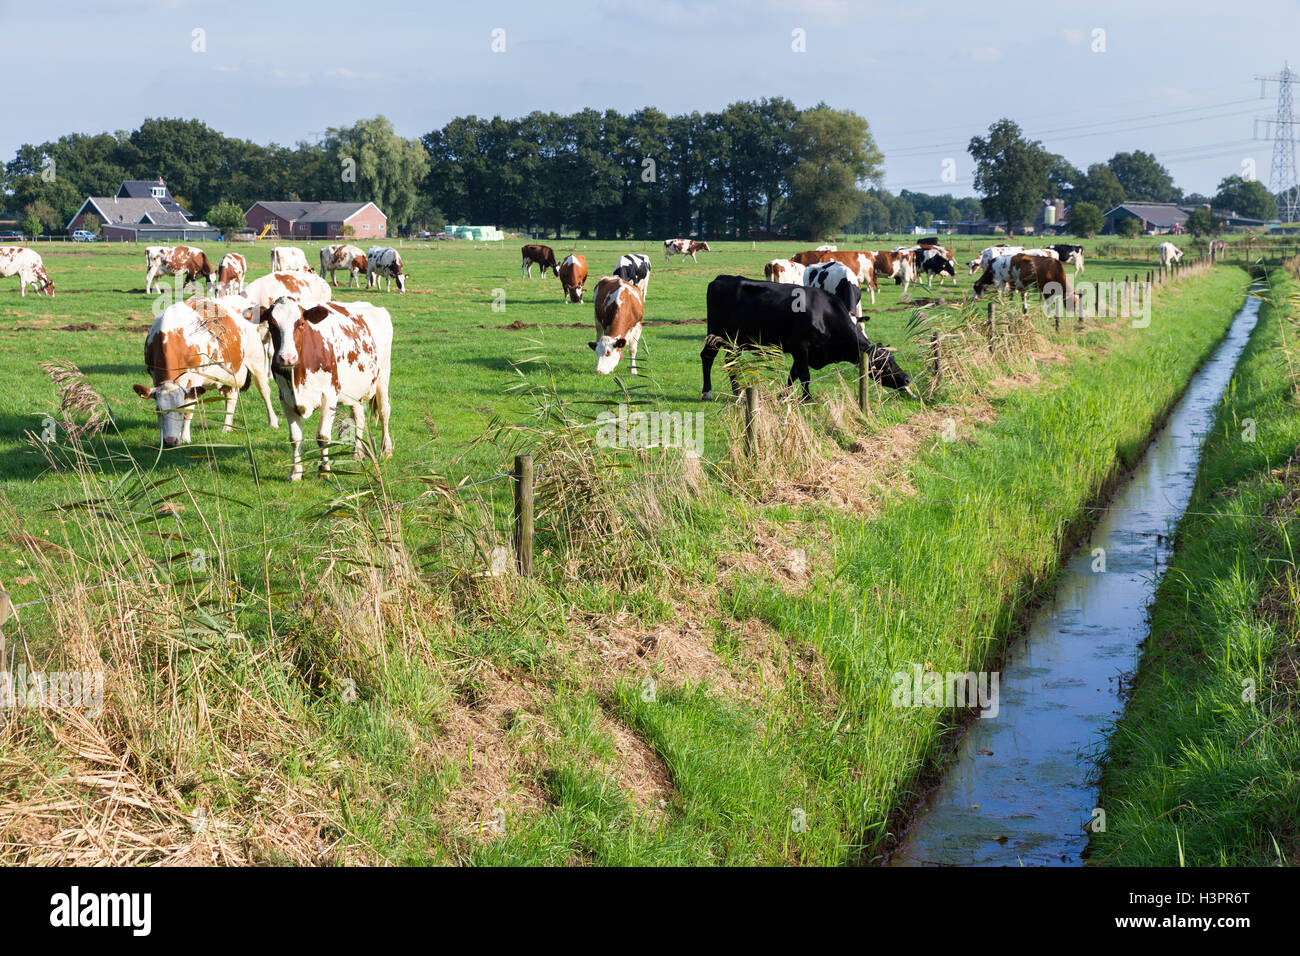 Herd of cattle grazing in european pasture near ditch Stock Photo